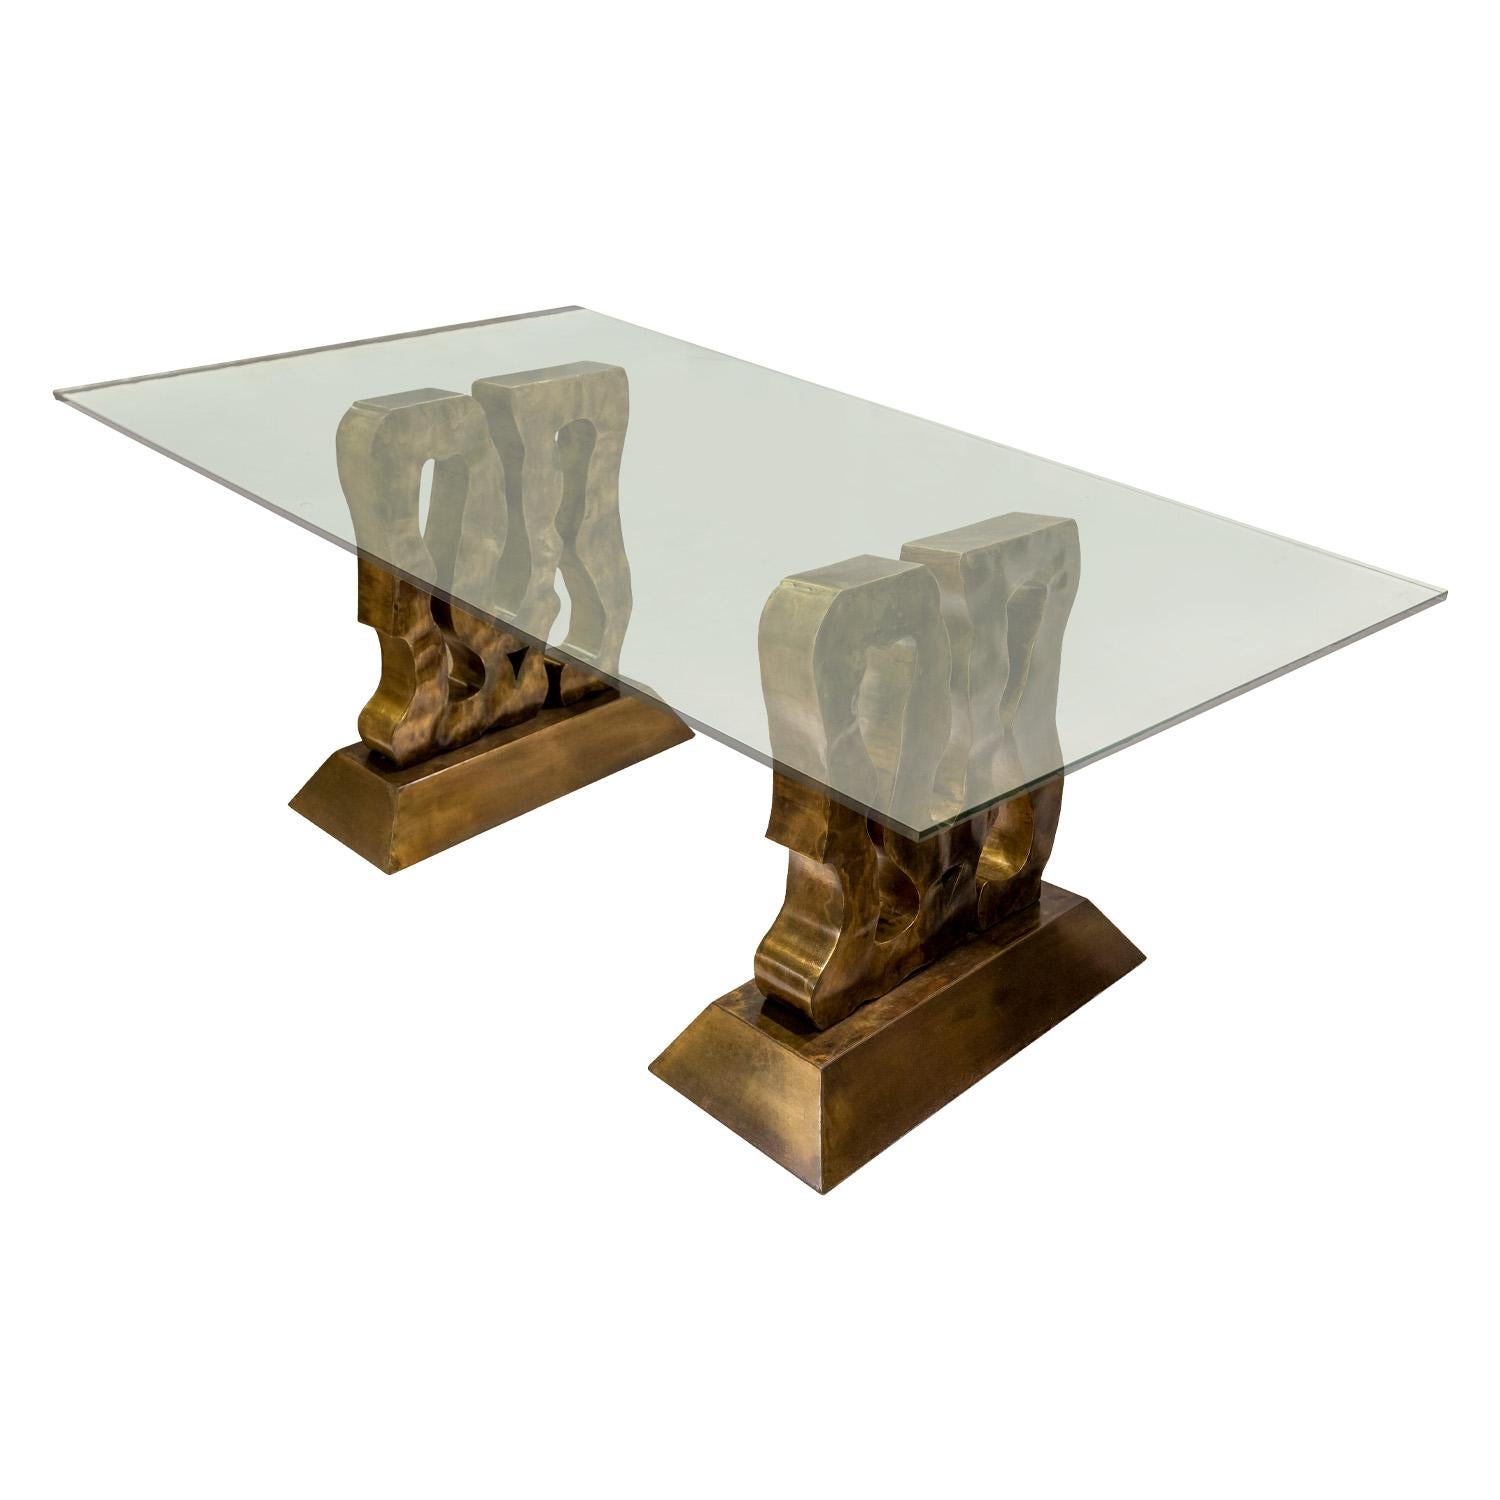 Stunning and unique “Abstract #1” dining table with 2 hand-brazed abstract sculpture bases in patinated bronze with a thick glass top by Philip & Kelvin LaVerne, American 1980's (engraved “Philip Kelvin LaVerne” in metal and original gallery label